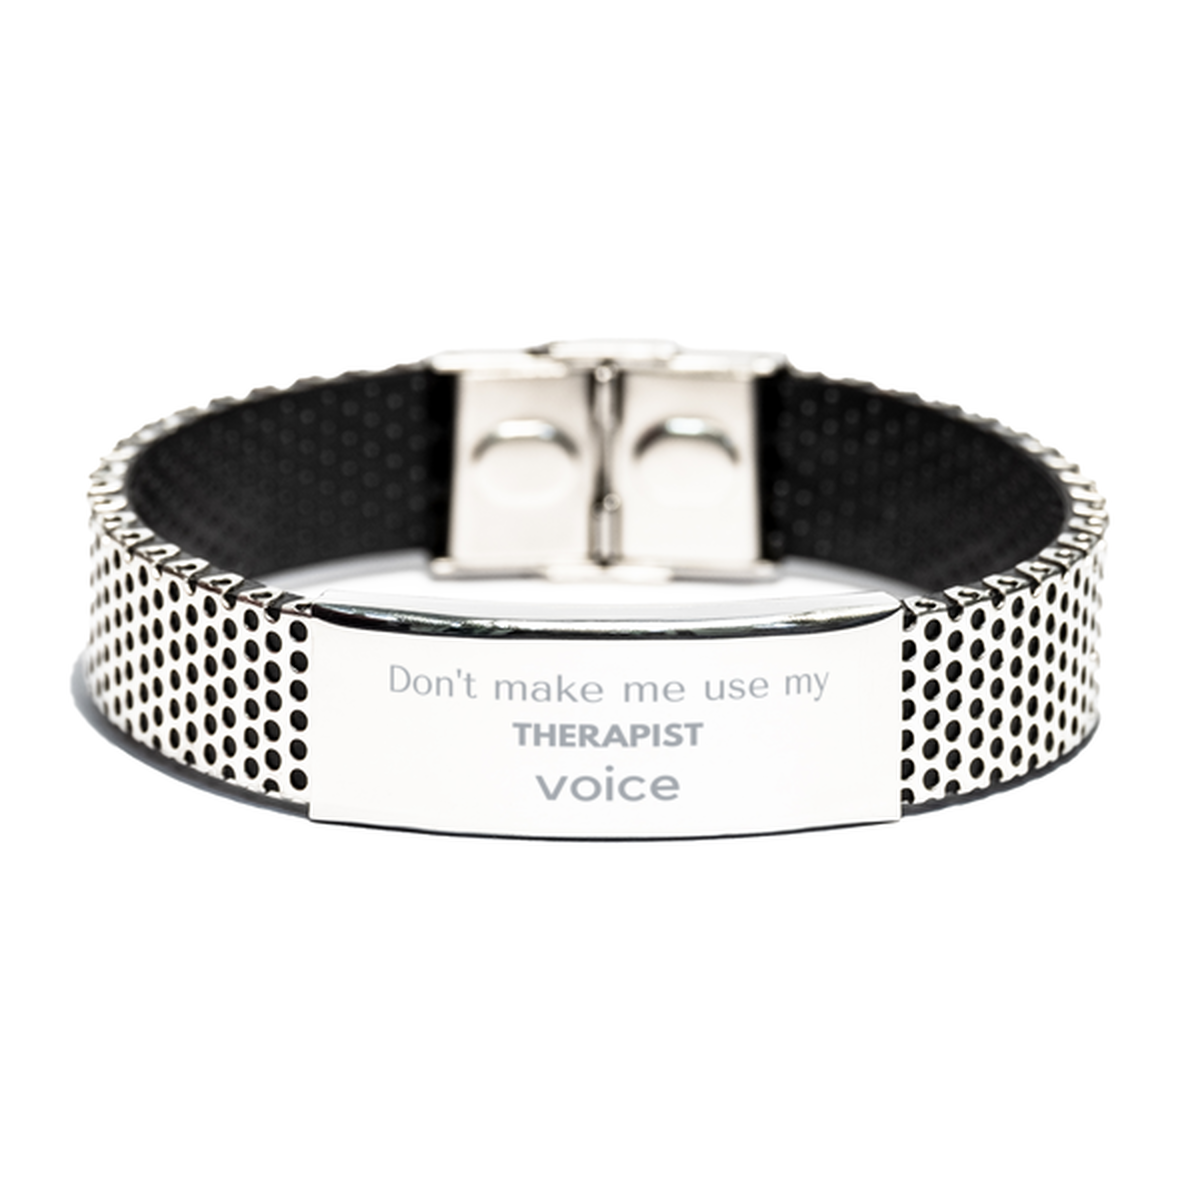 Don't make me use my Therapist voice, Sarcasm Therapist Gifts, Christmas Therapist Stainless Steel Bracelet Birthday Unique Gifts For Therapist Coworkers, Men, Women, Colleague, Friends